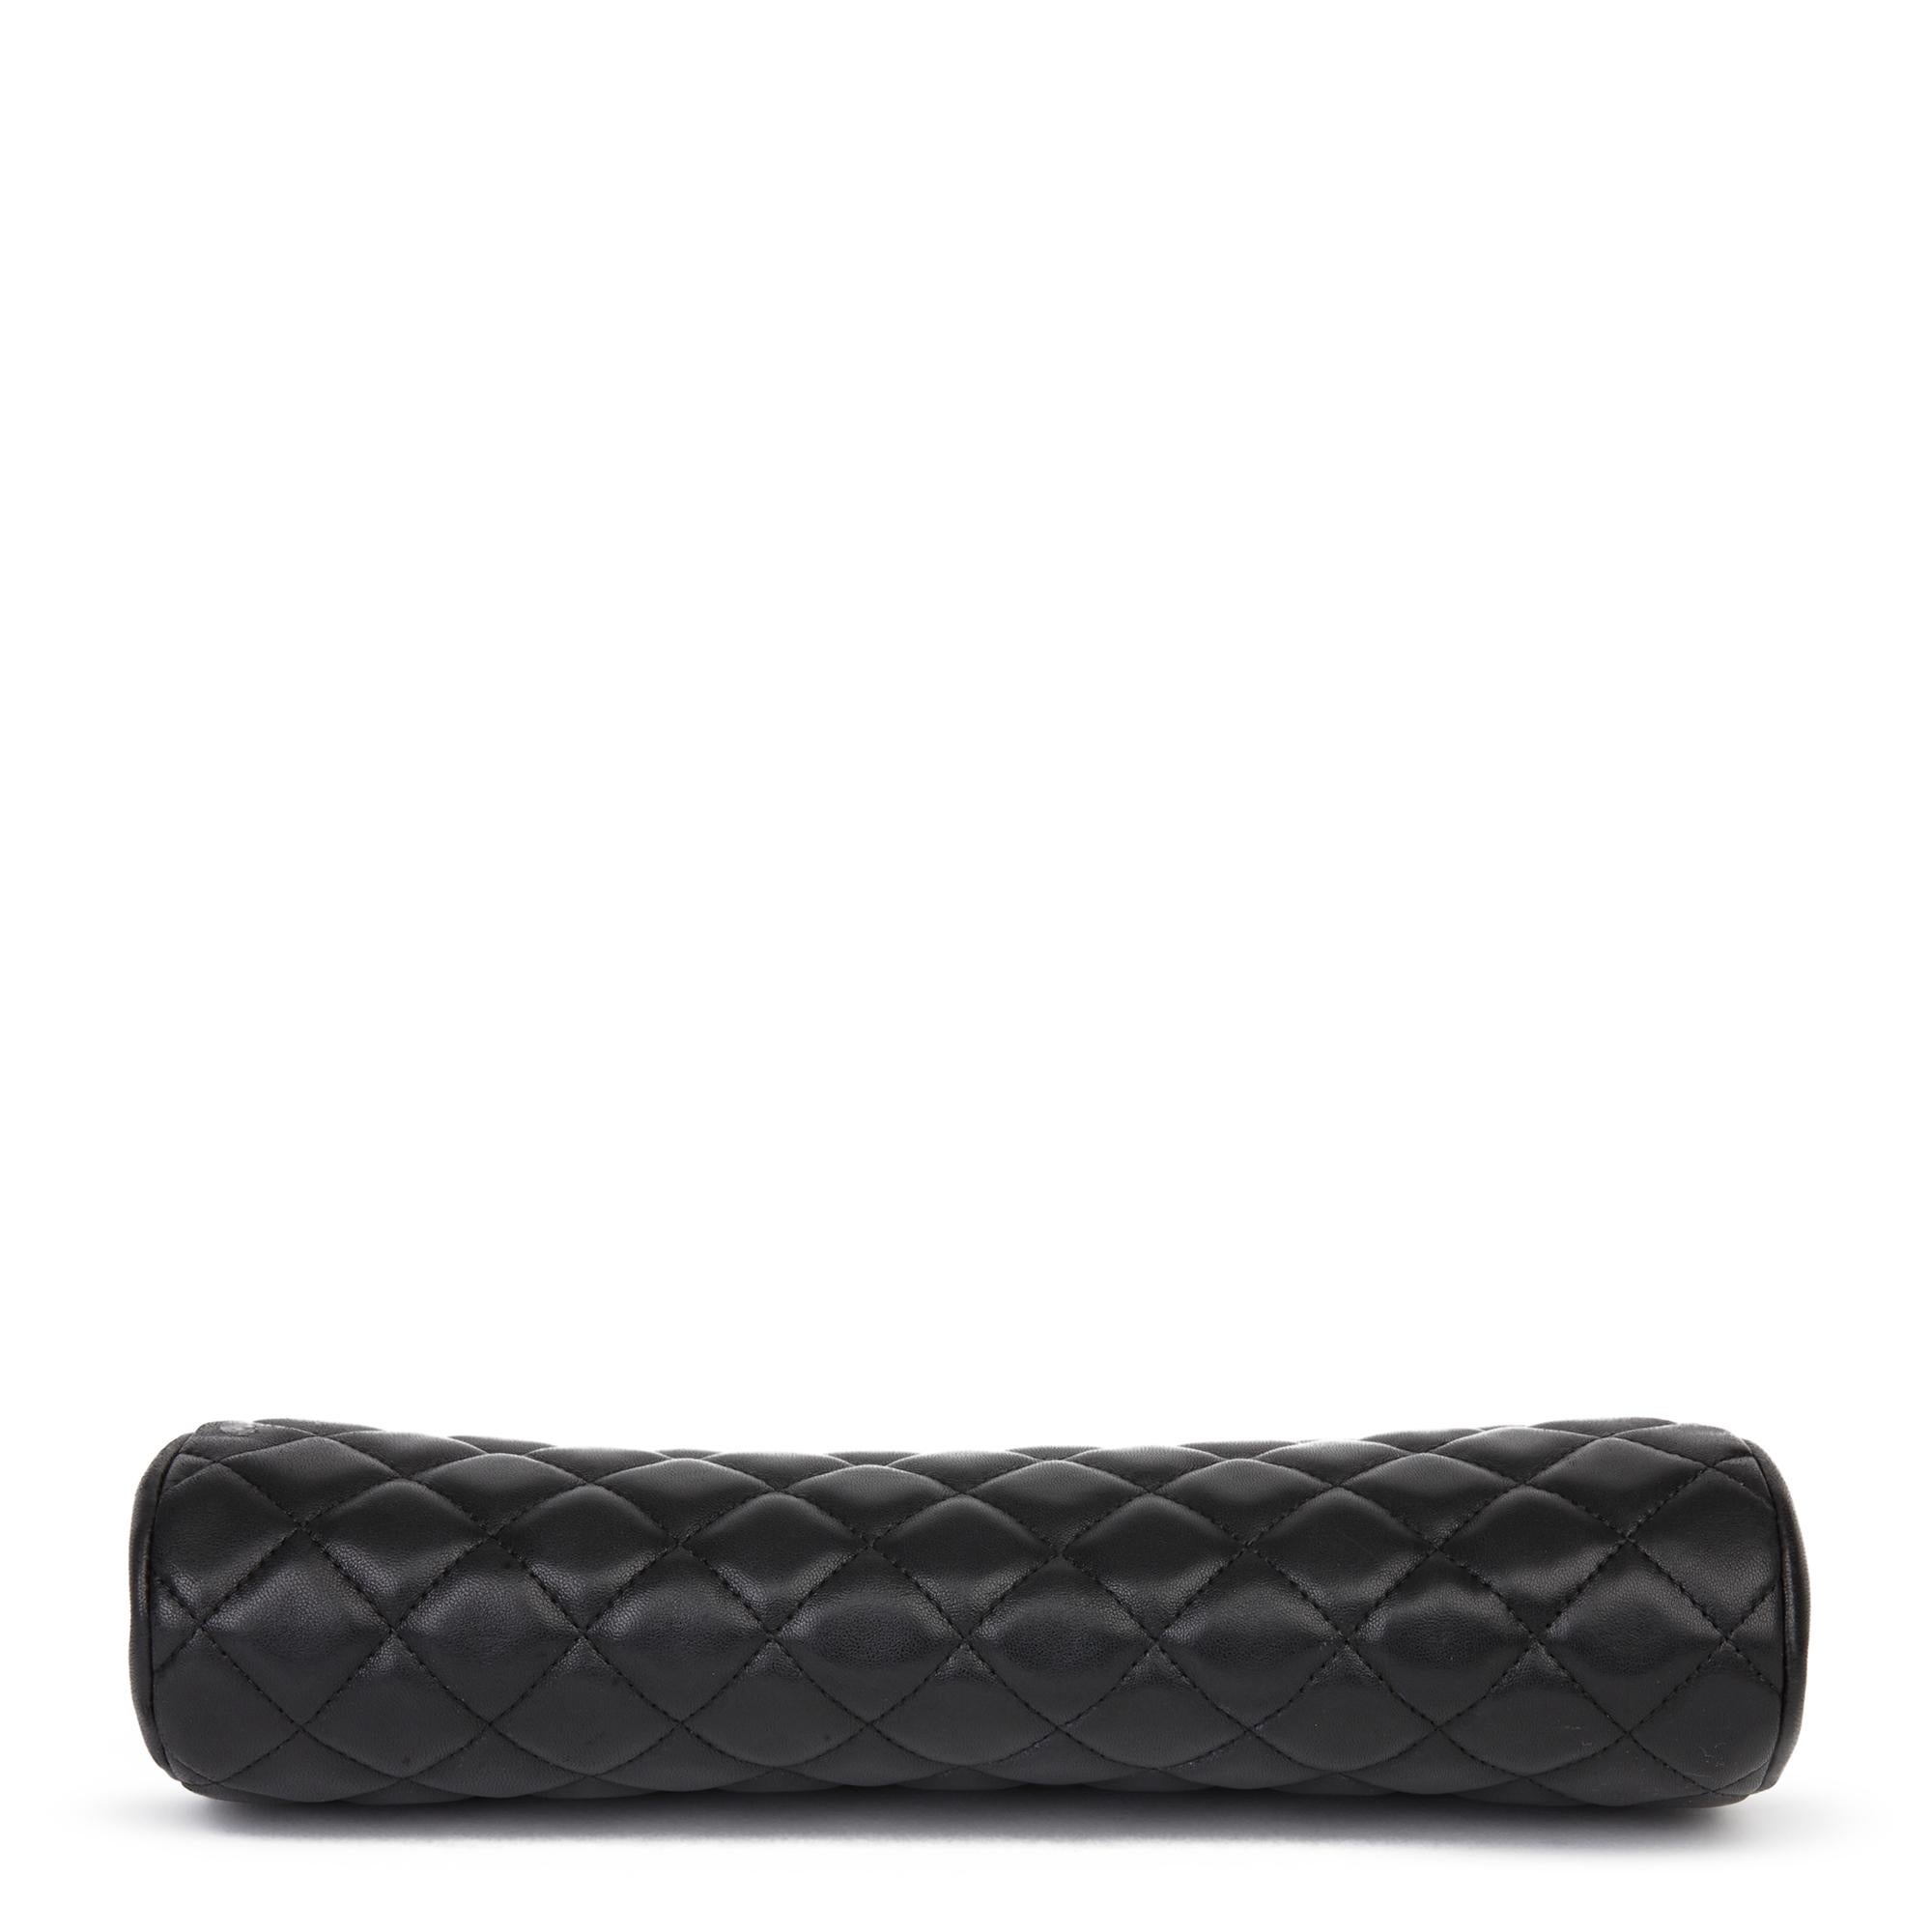 2011 Chanel Black Quilted Lambskin Timeless Clutch 1